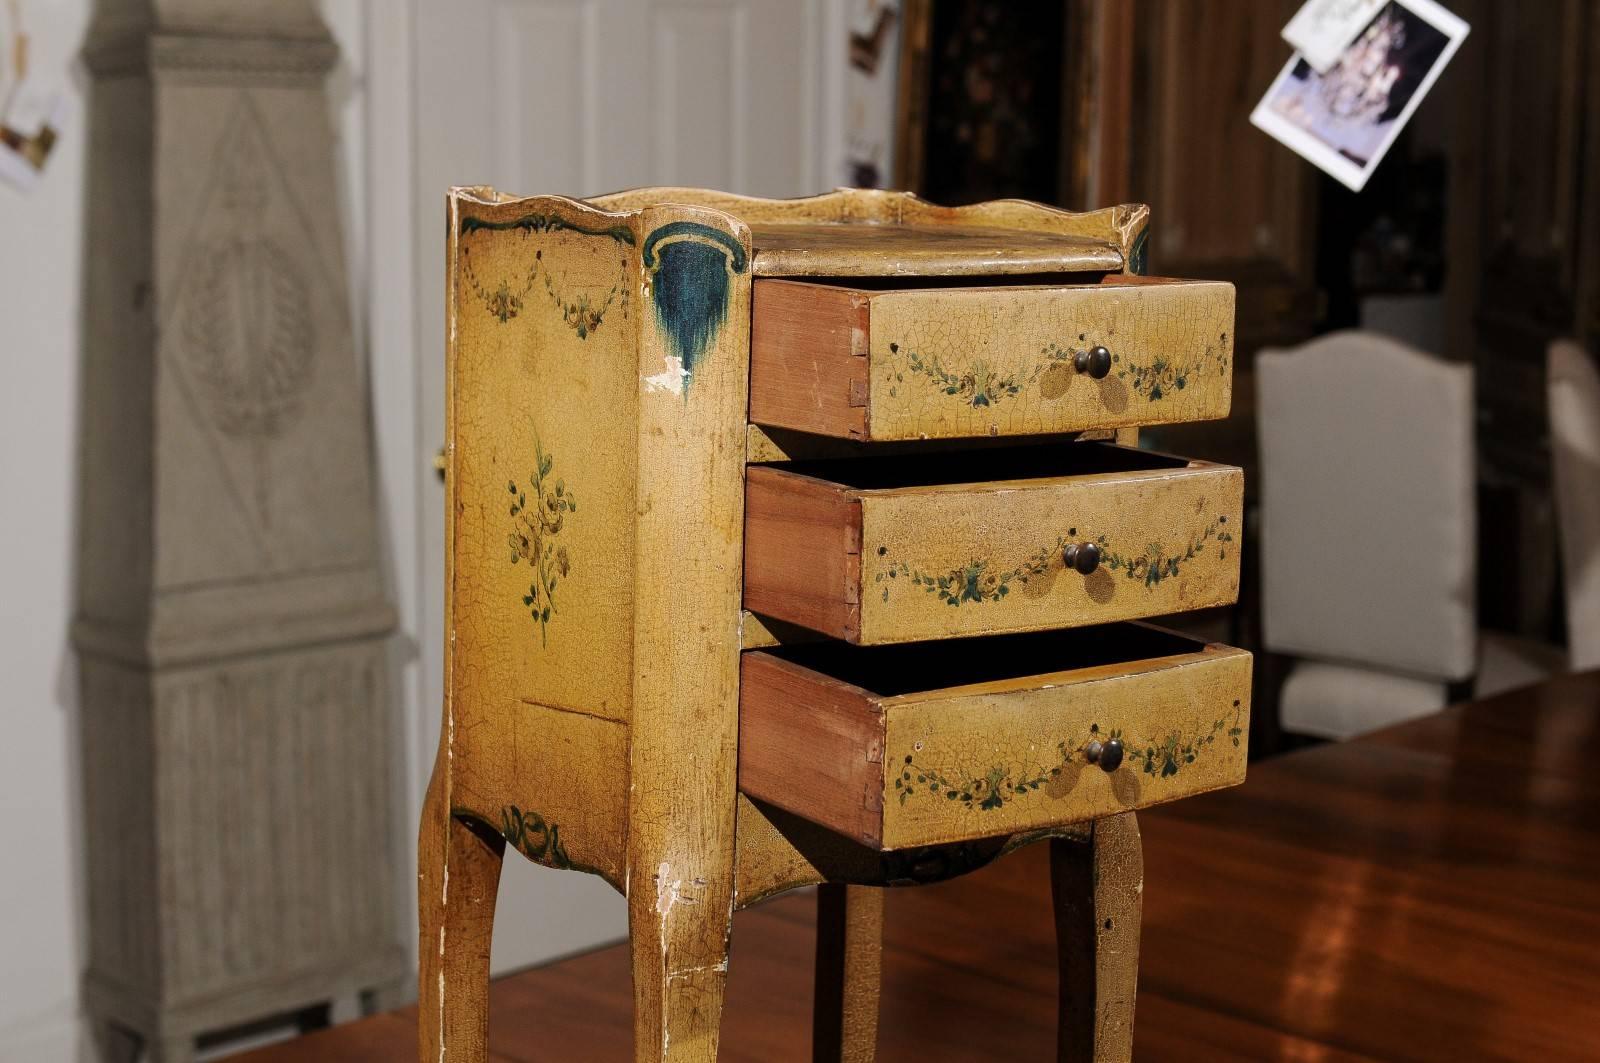 Italian 19th Century Nightstand Table with Painted Decor, Drawers and Low Shelf 1